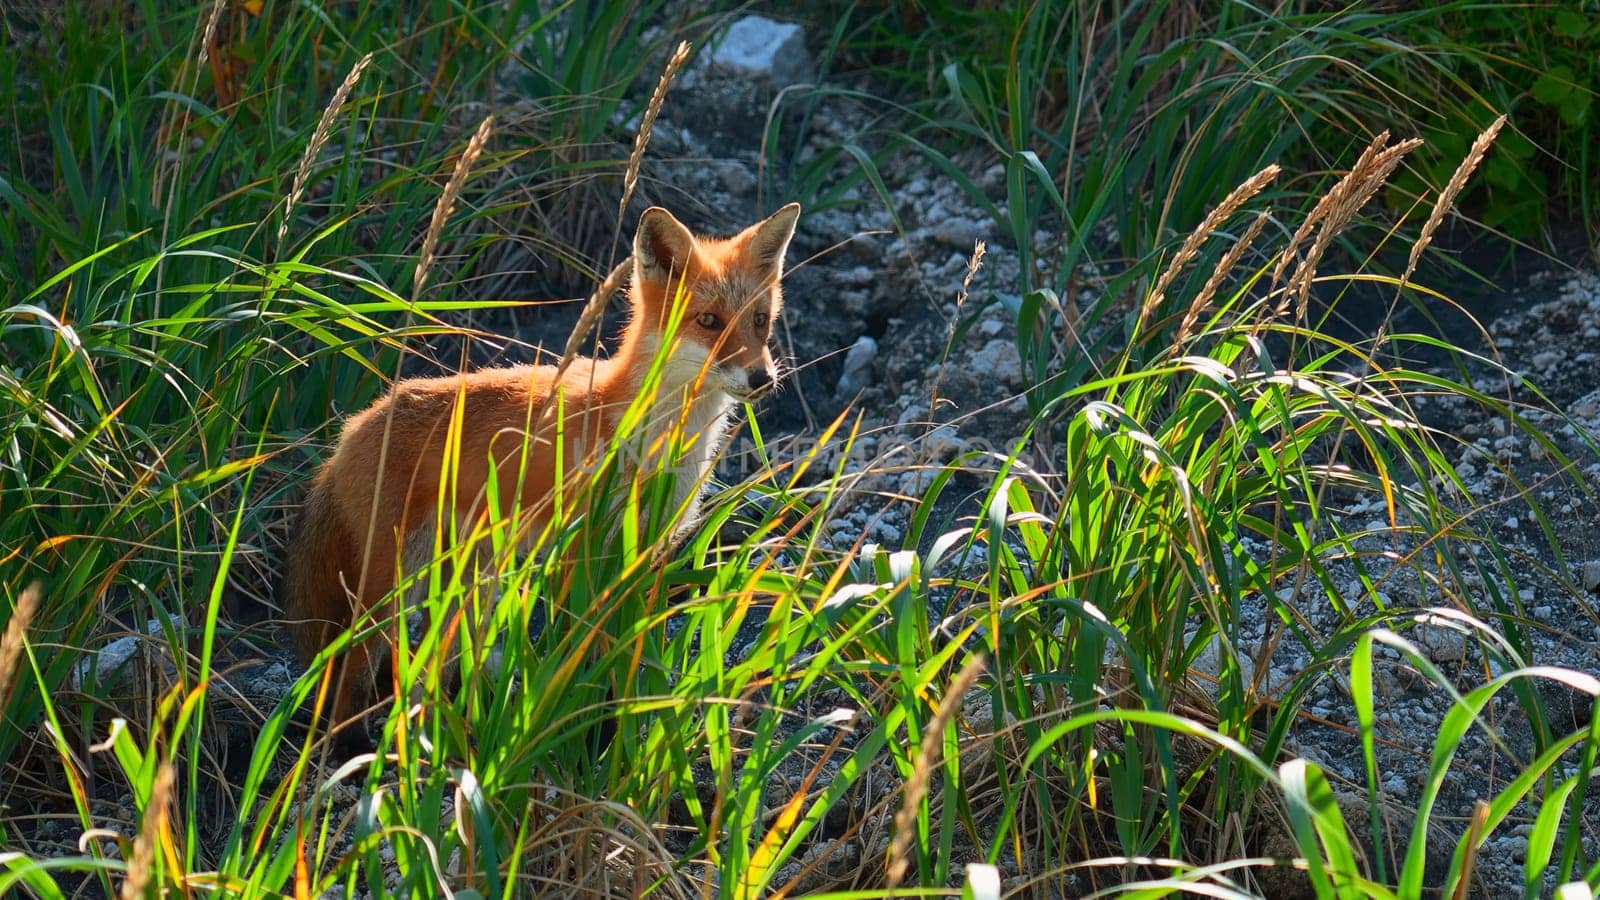 Red fox in grass. Clip. Red fox runs along stone slope with green grass. Shooting wildlife with red fox and tall green grass.